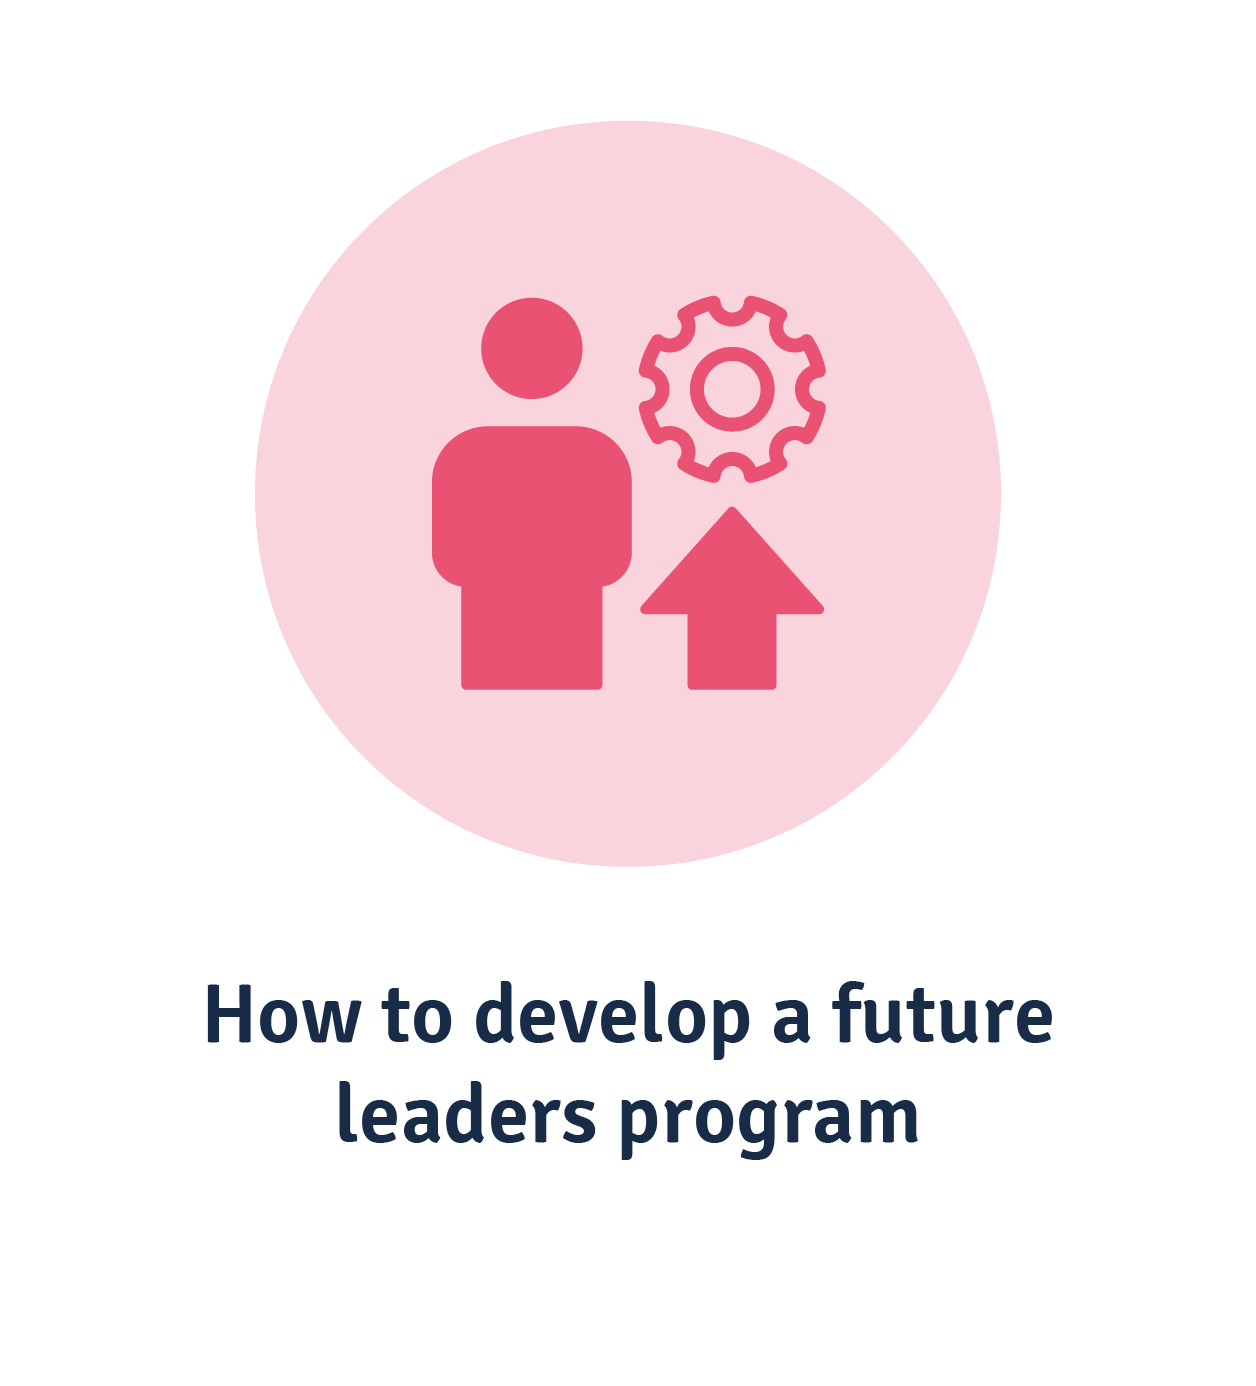 How to develop a future leaders program